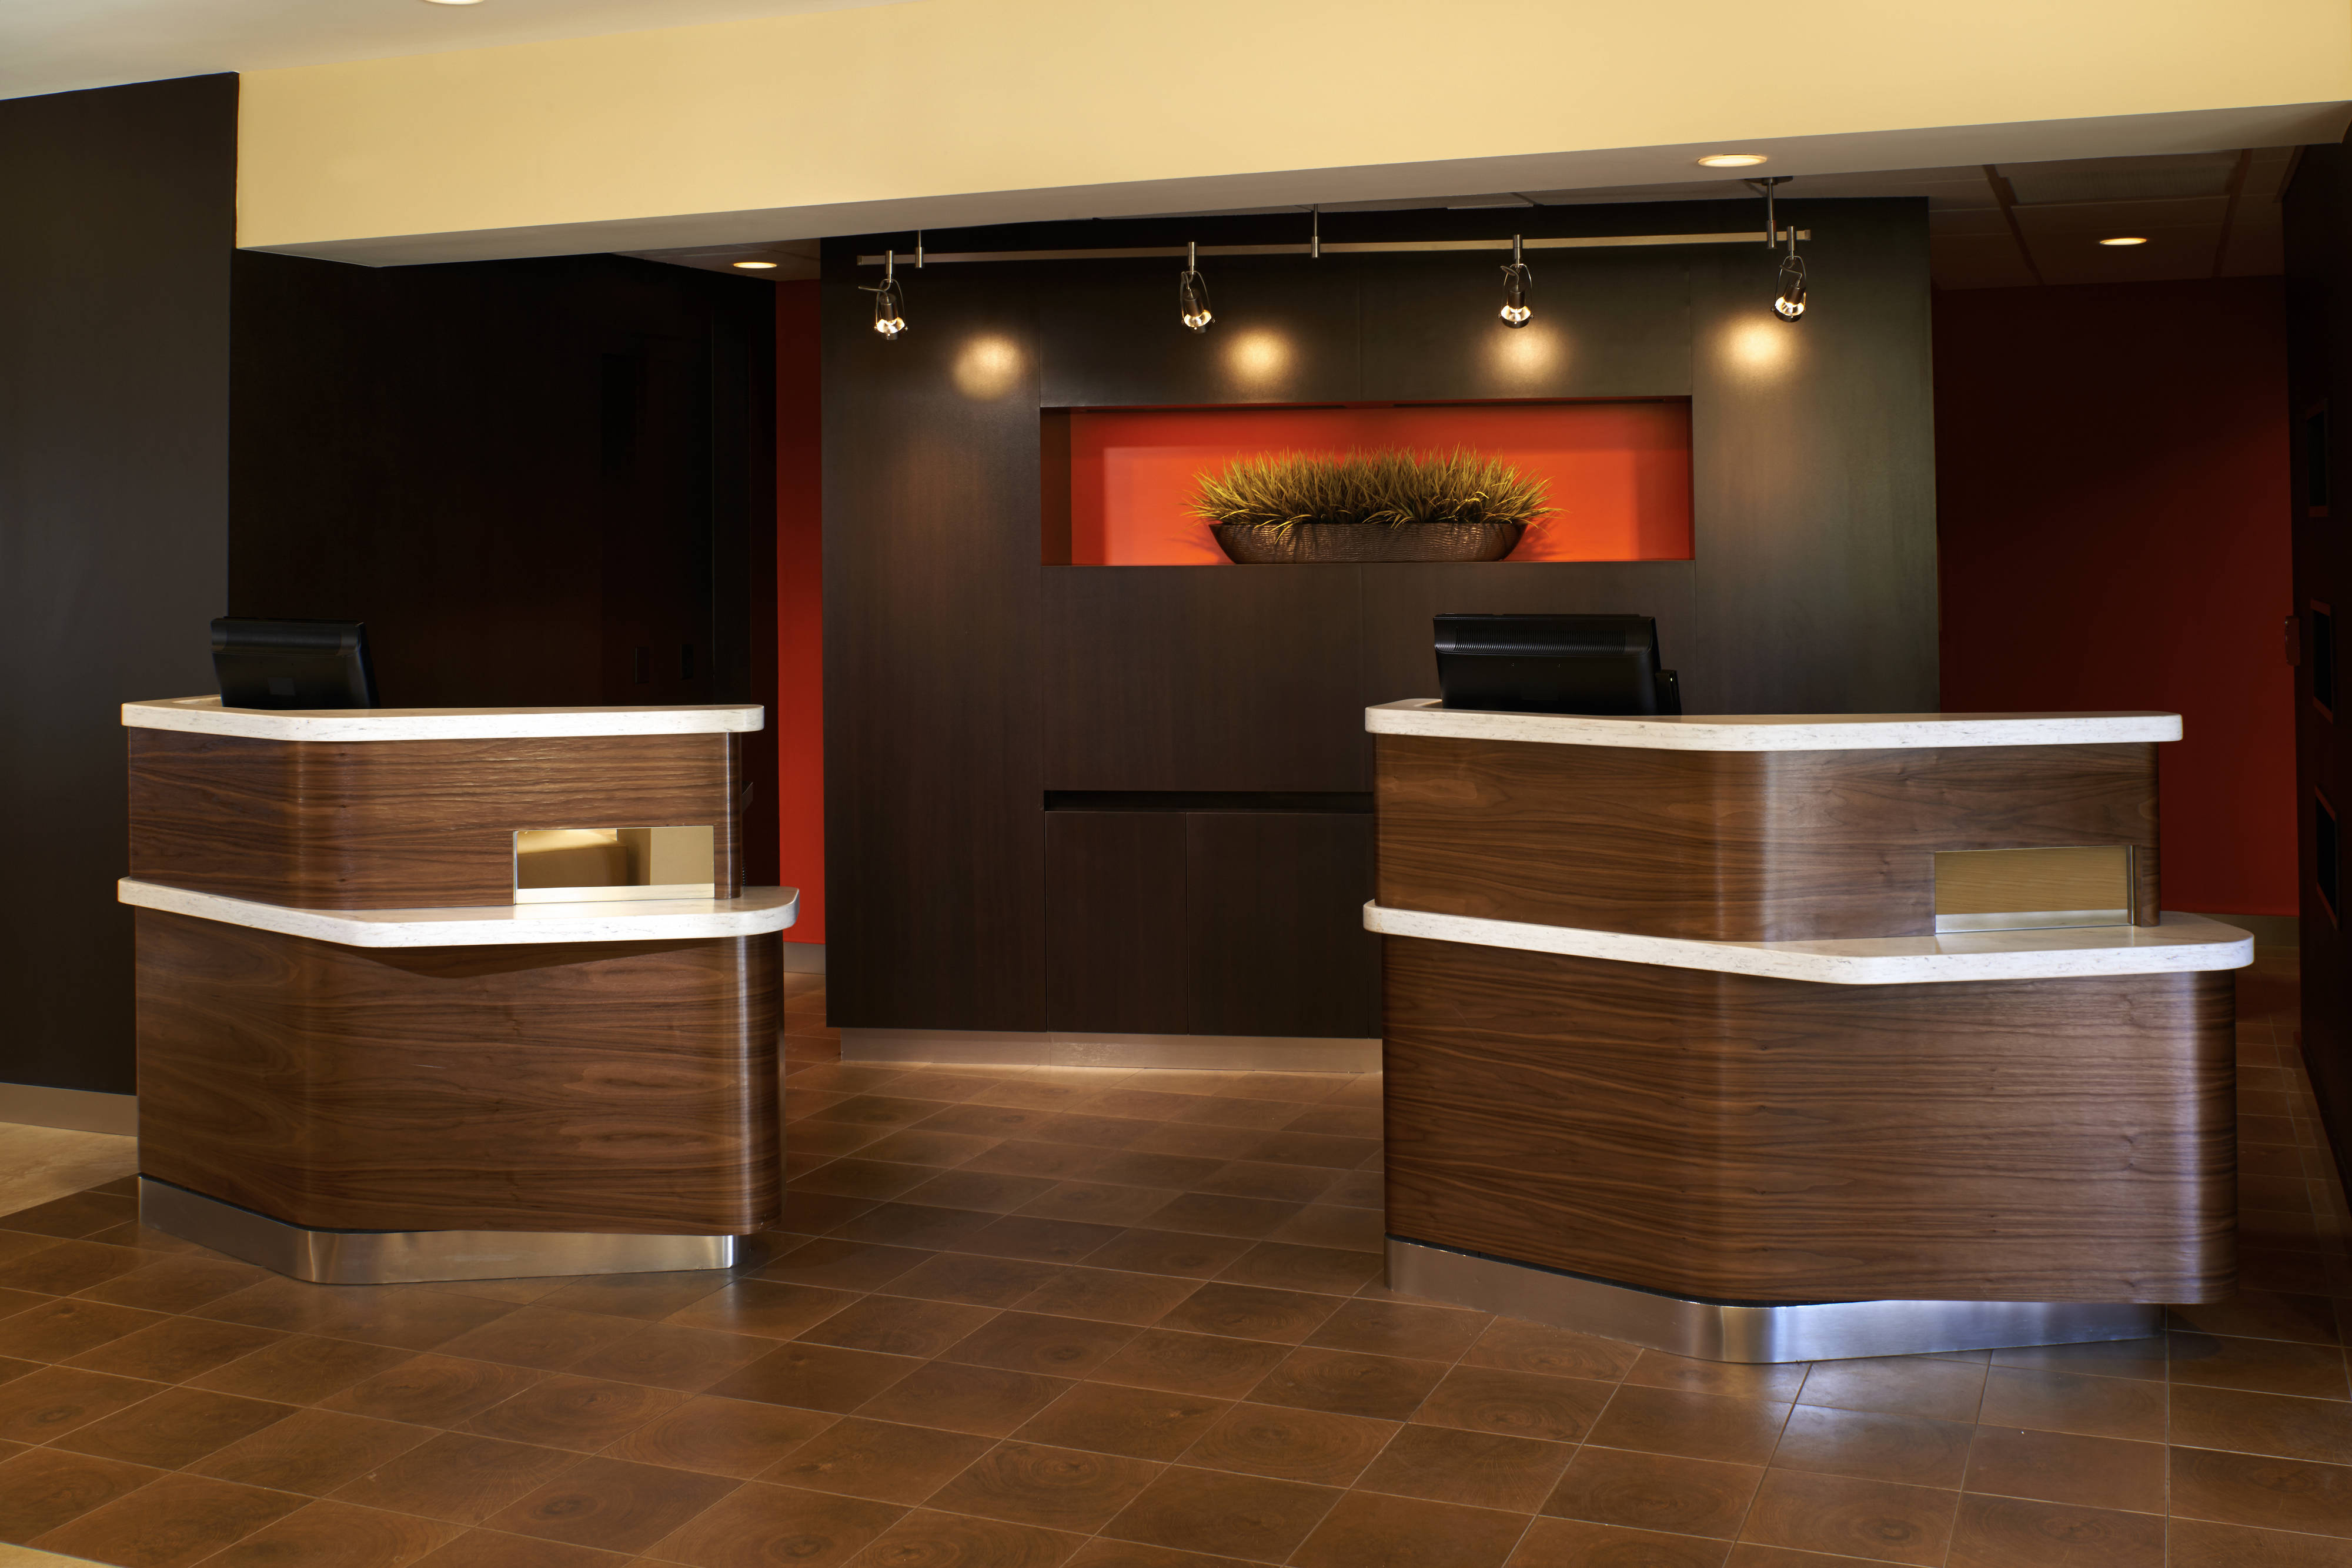 Photo of Courtyard by Marriott Chicago Highland Park/Northbrook, Highland Park, IL